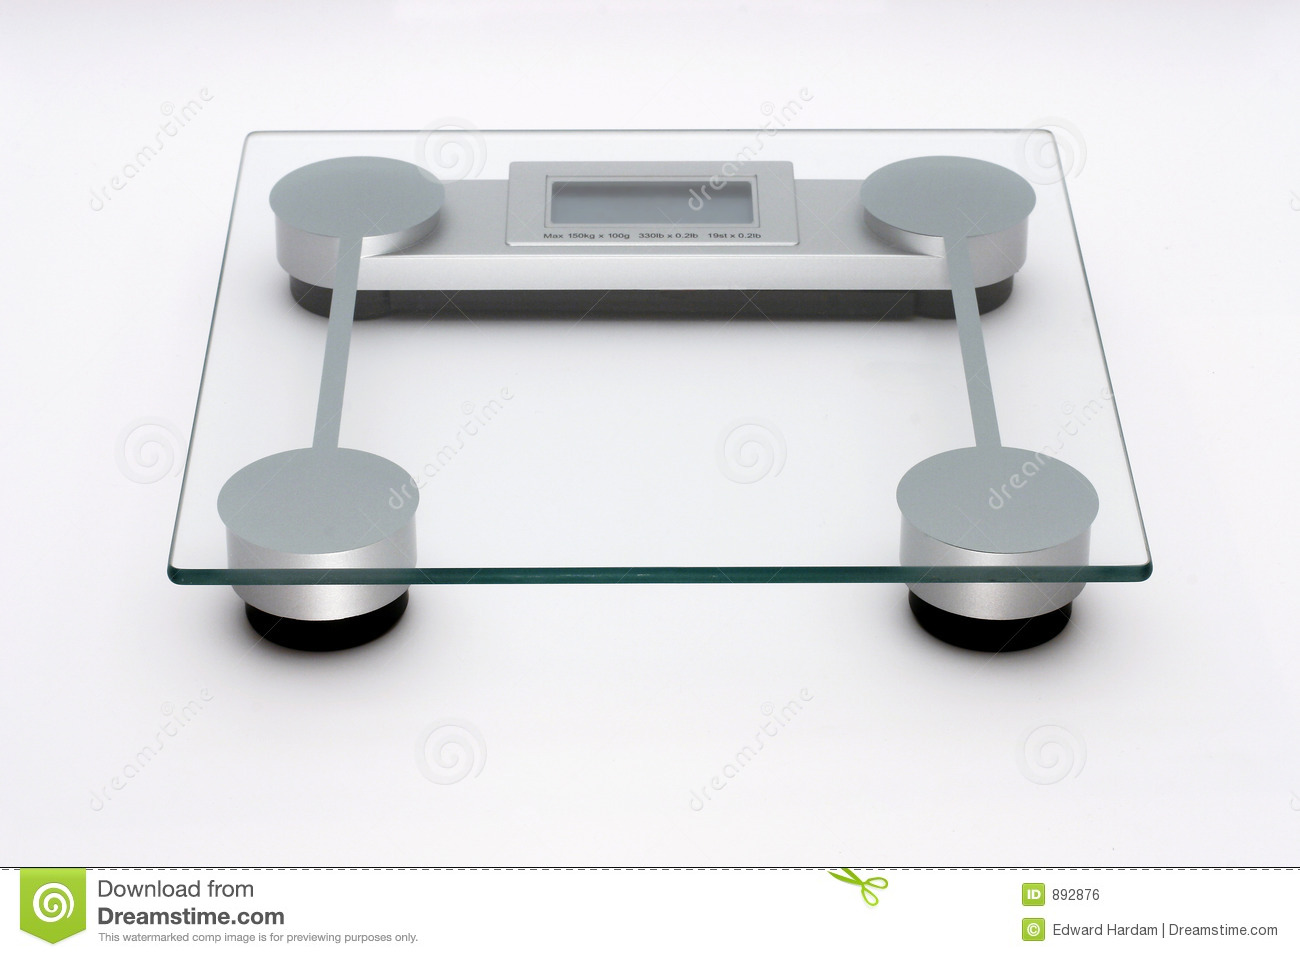 Bathroom Scales Royalty Free Stock Image   Image  892876